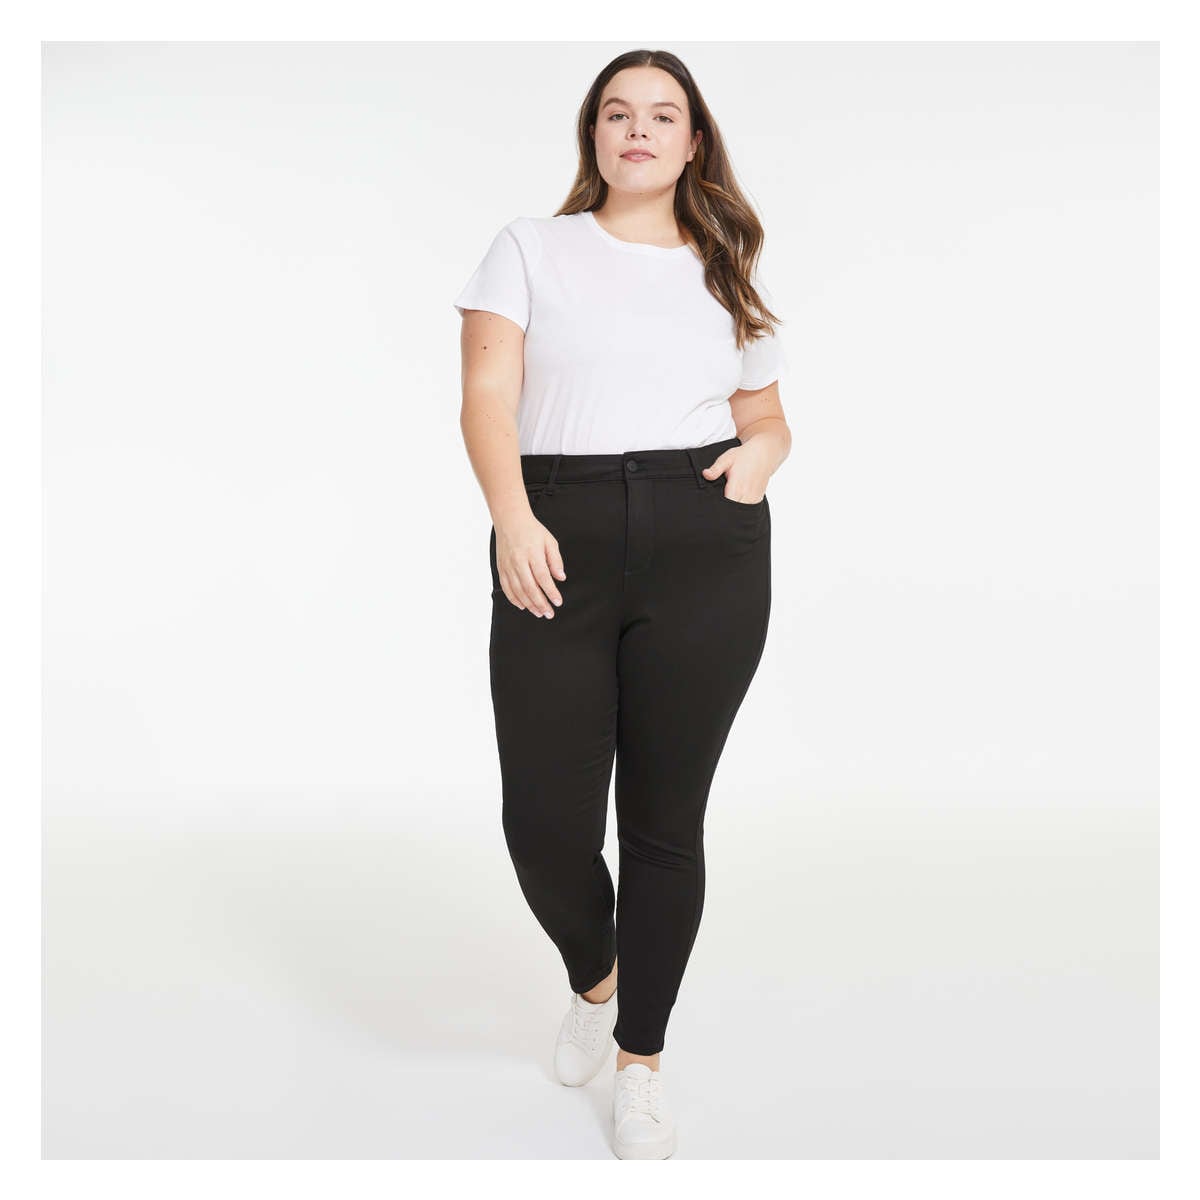 Skinny Leg Pocket Jeggings Black (827BLK)A perfect pair of pants for  comfort and style! These new skinny fit jeggings feature 2 rear pocket and  2 front pockets. Made from a cotton spandex